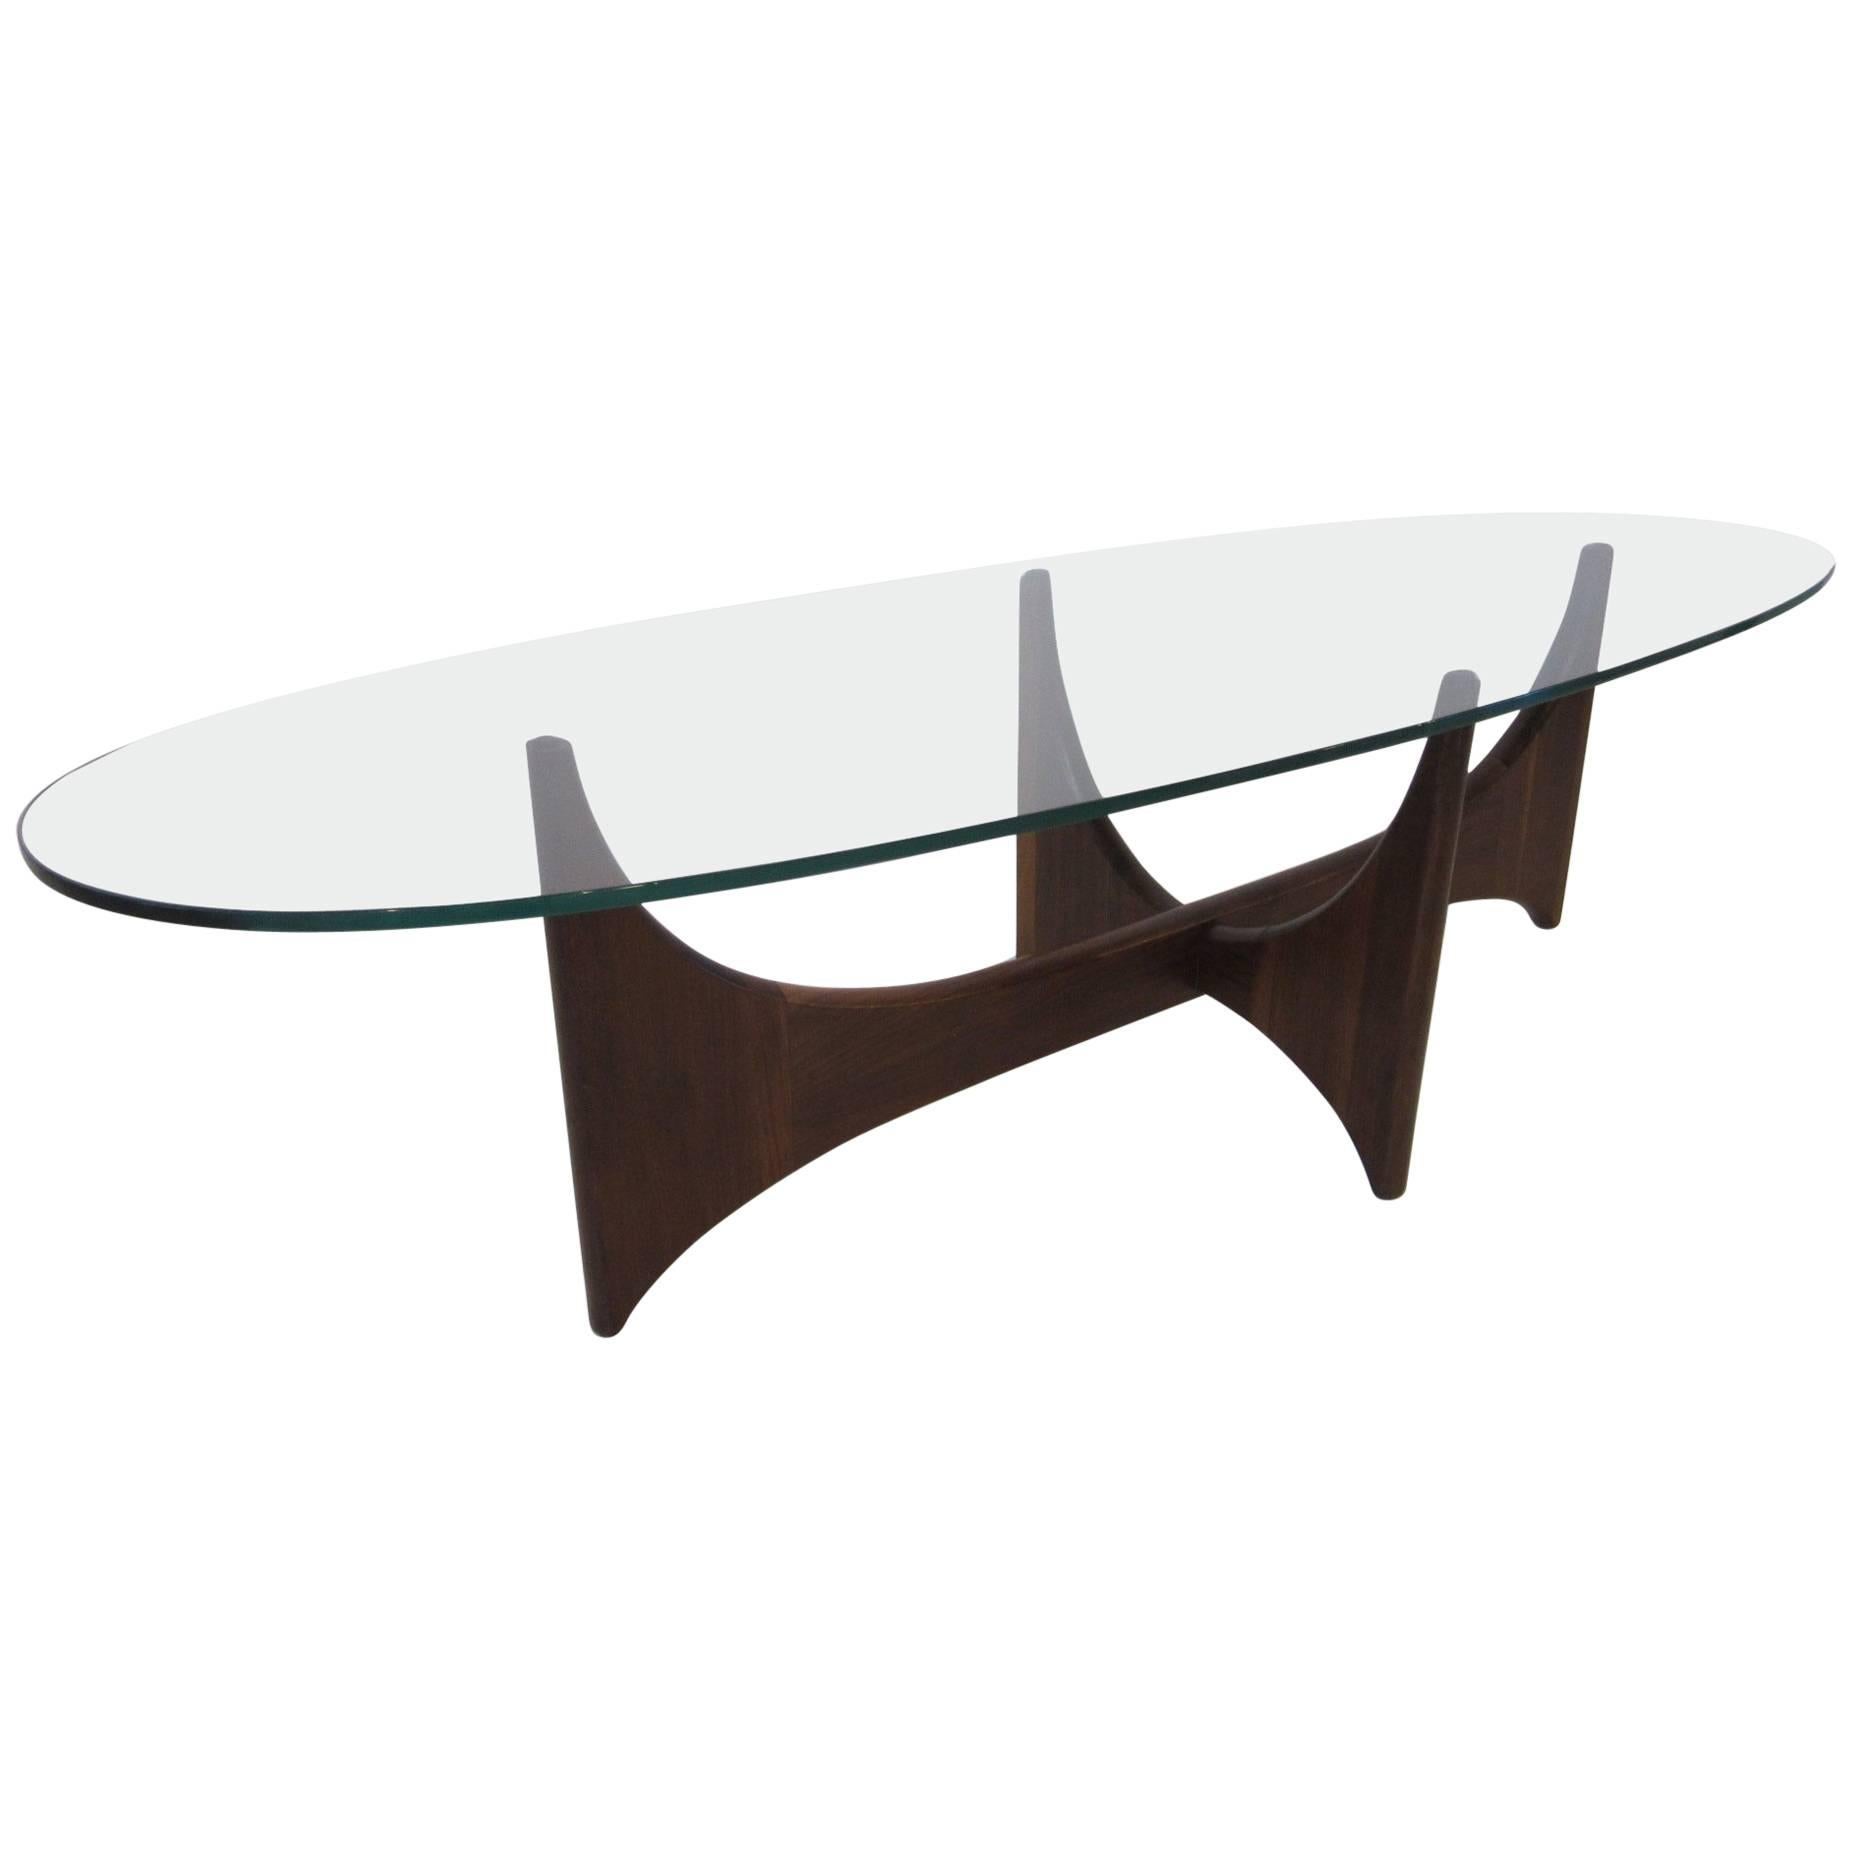 Sculptural Walnut and Glass Adrian Pearsall Coffee Table